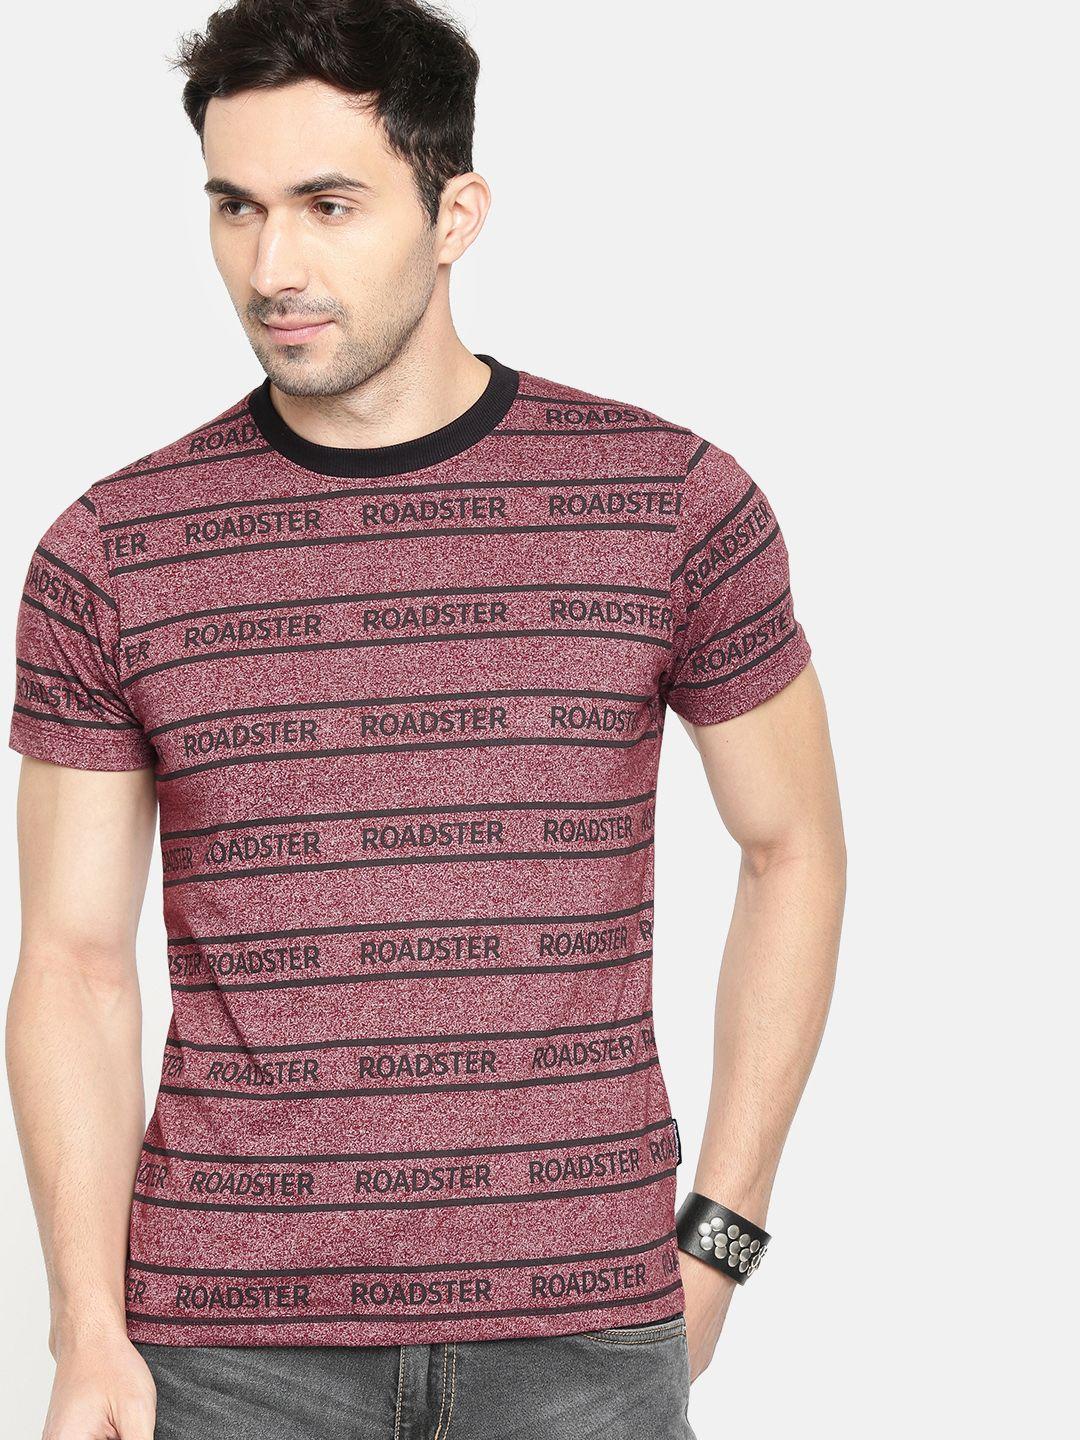 the roadster lifestyle co men maroon & black striped round neck t-shirt